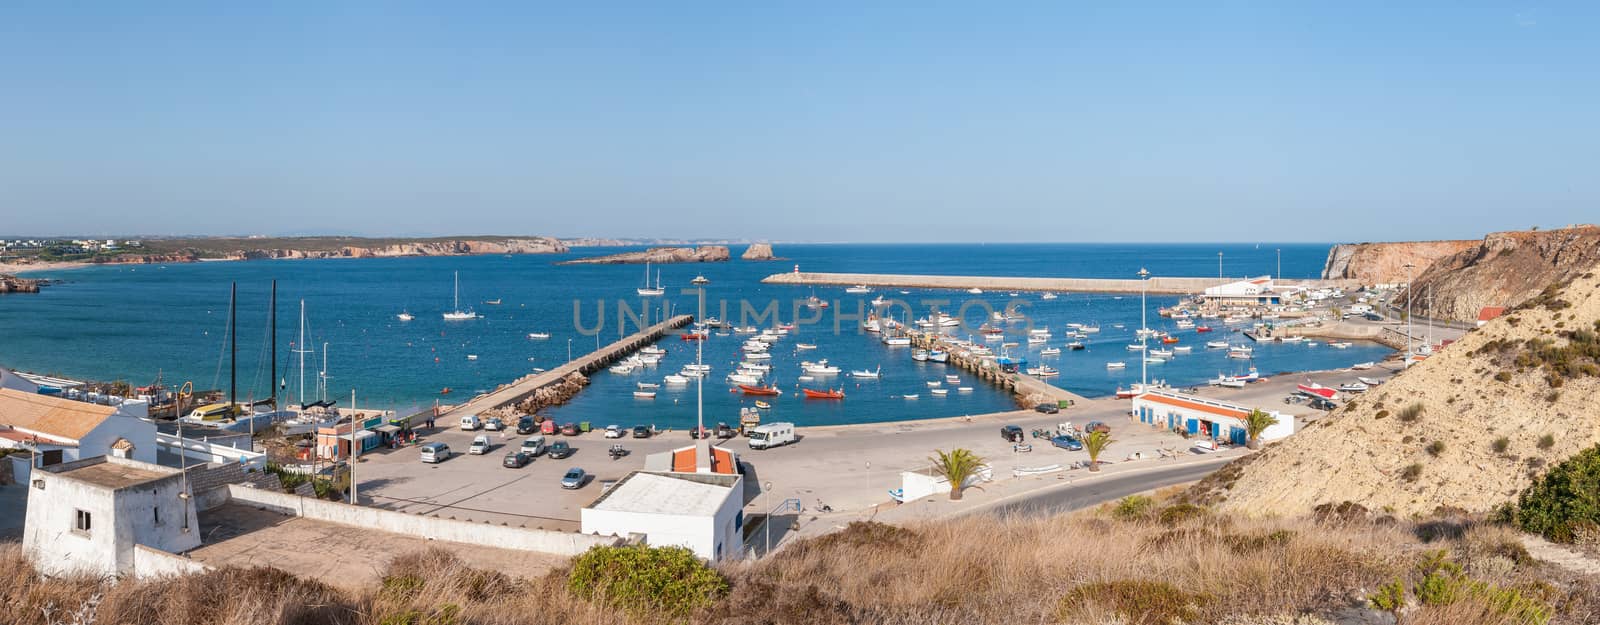 Panoramic view of old port in Sagres with traditional fishing boats, Algarve, Portugal